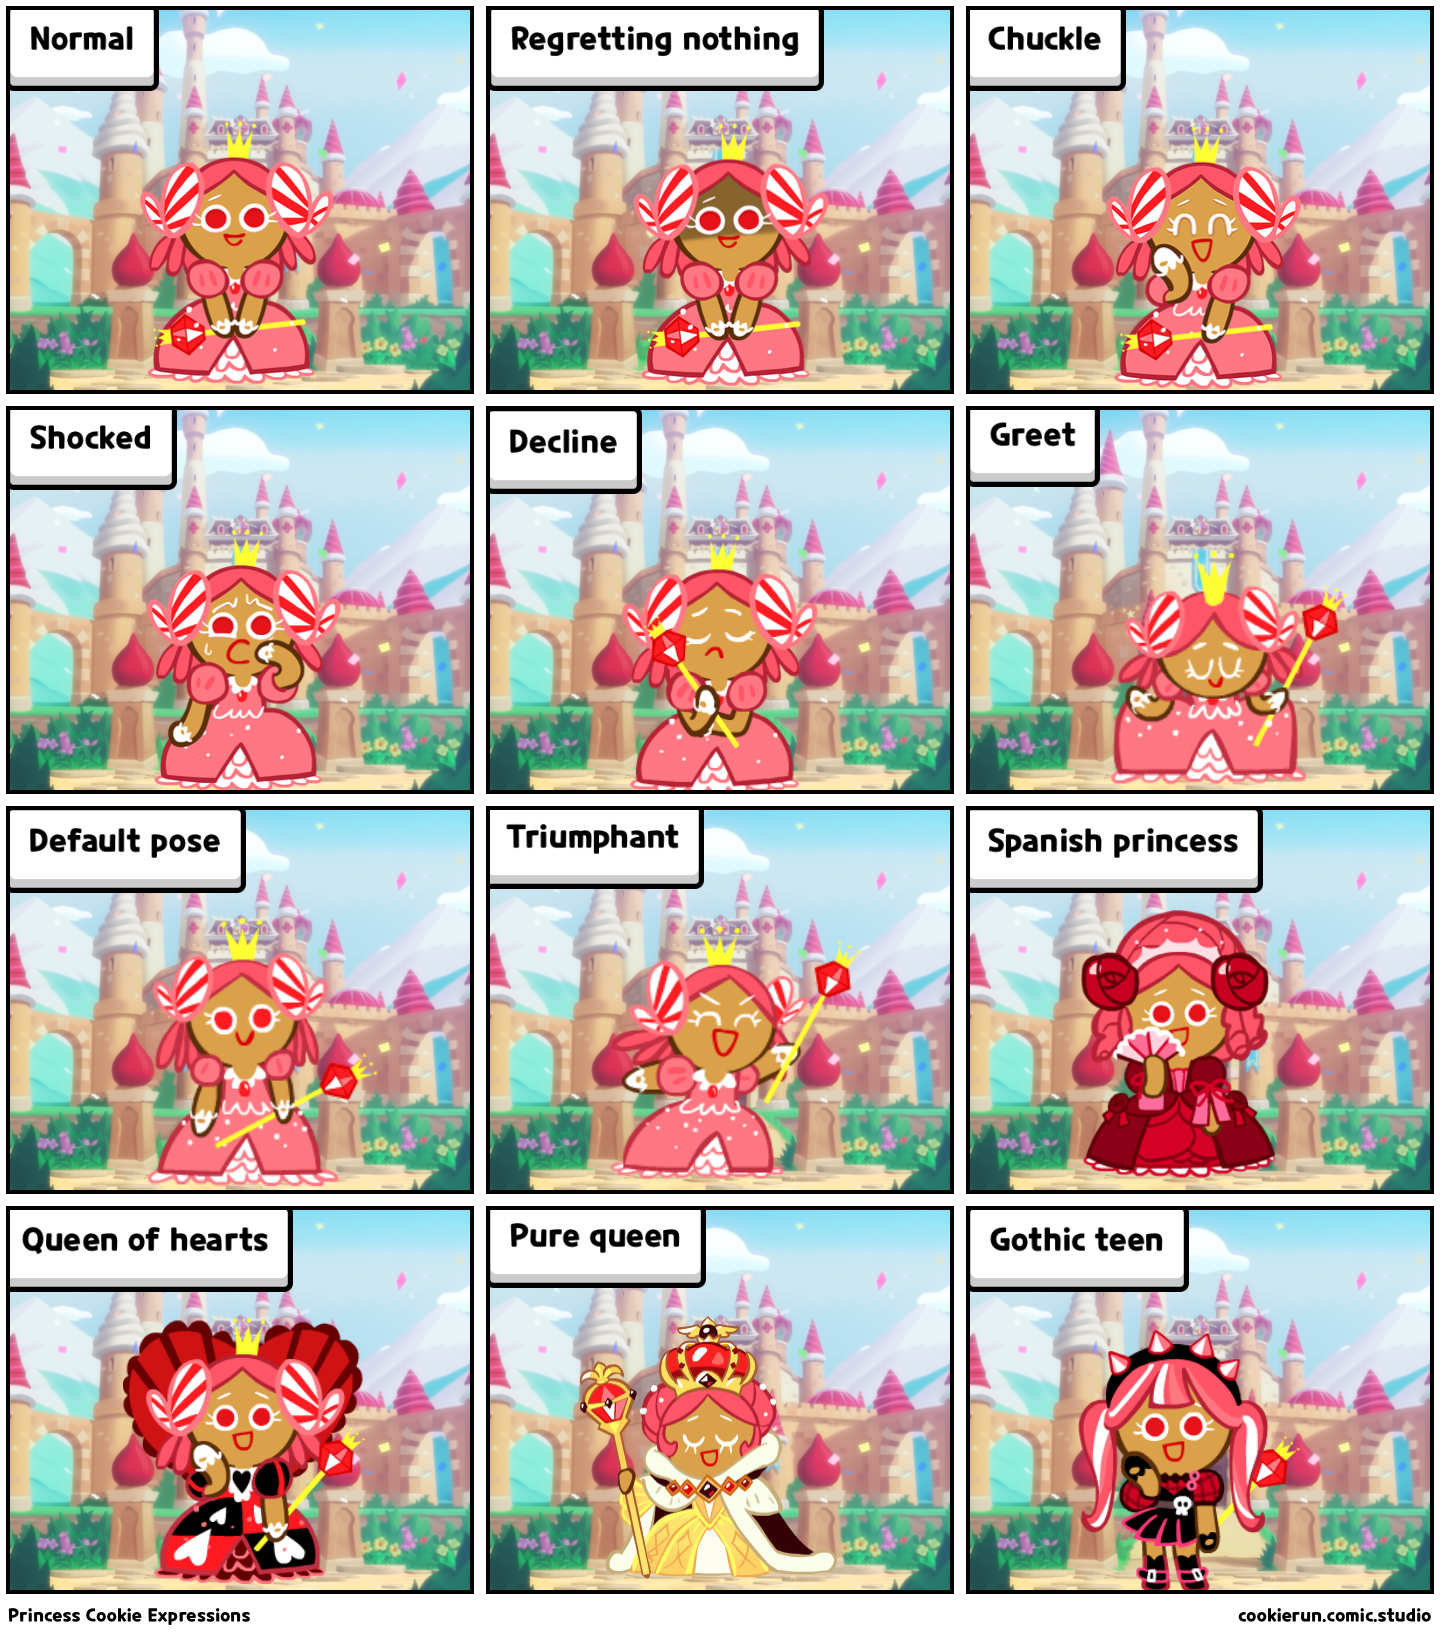 Princess Cookie Expressions